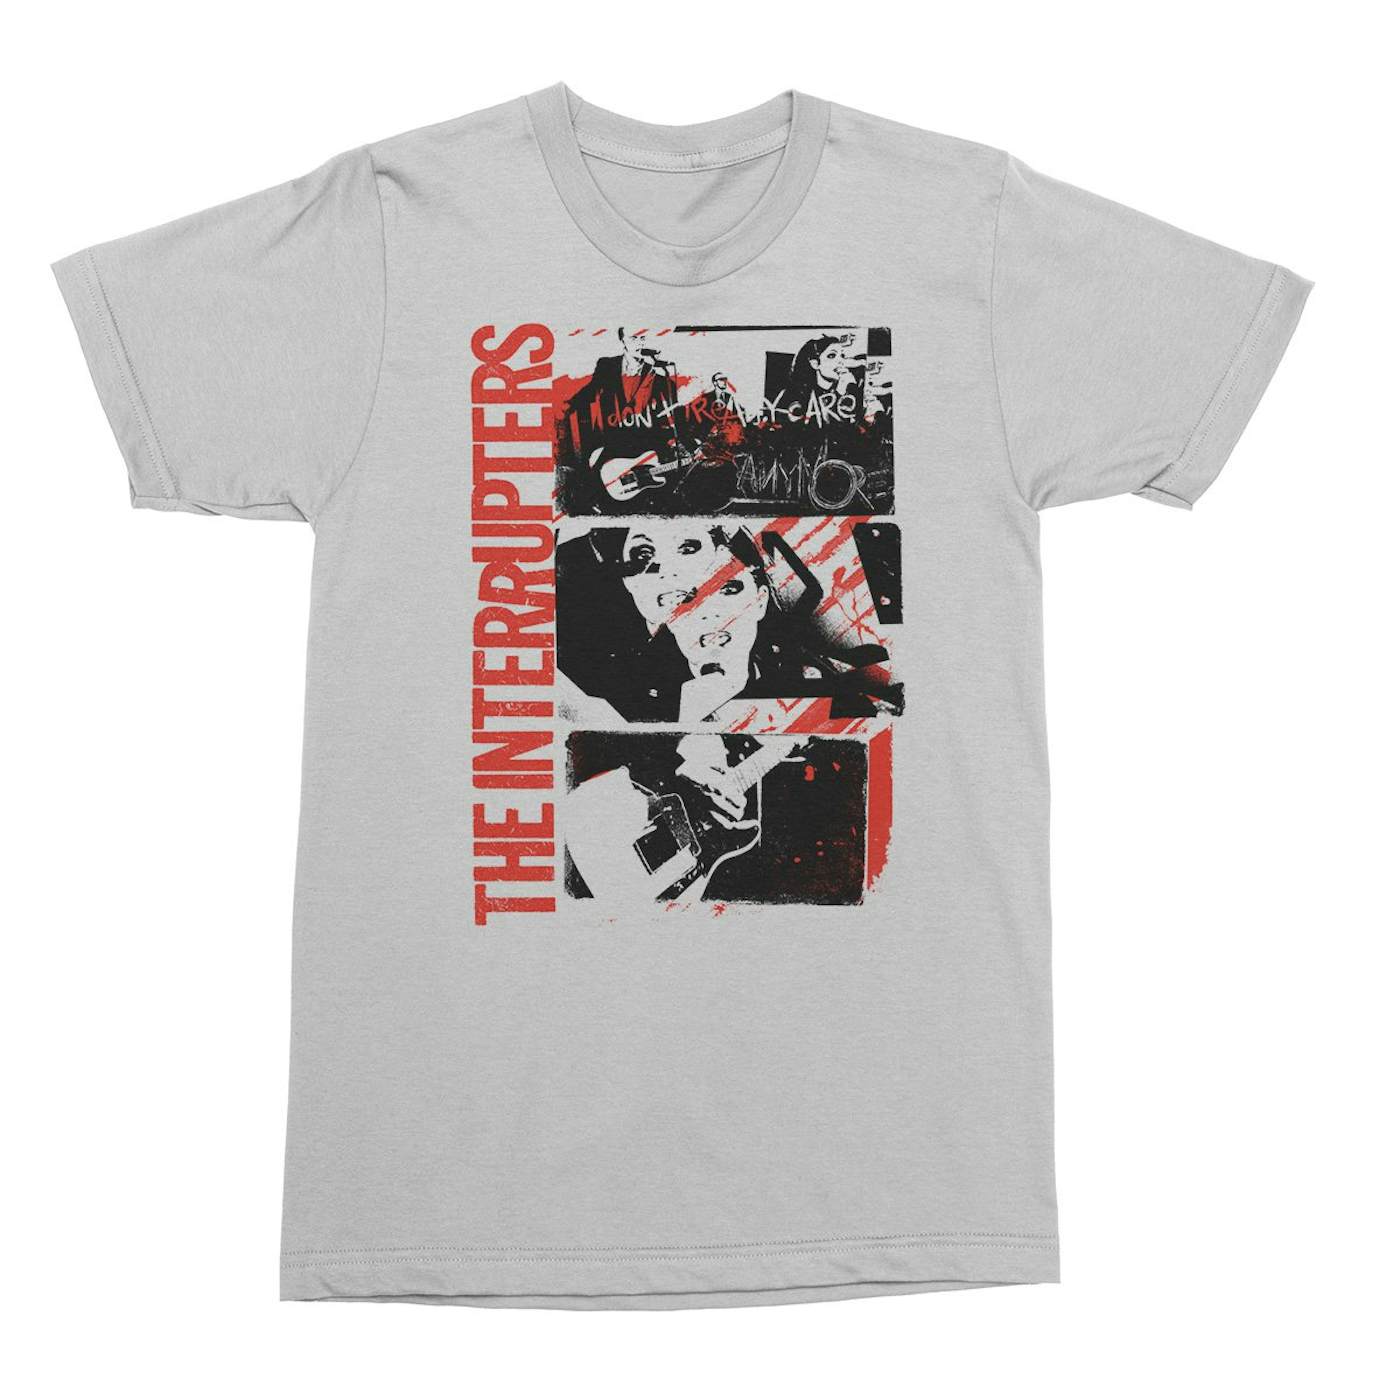 The Interrupters Don't Care T-Shirt (White)